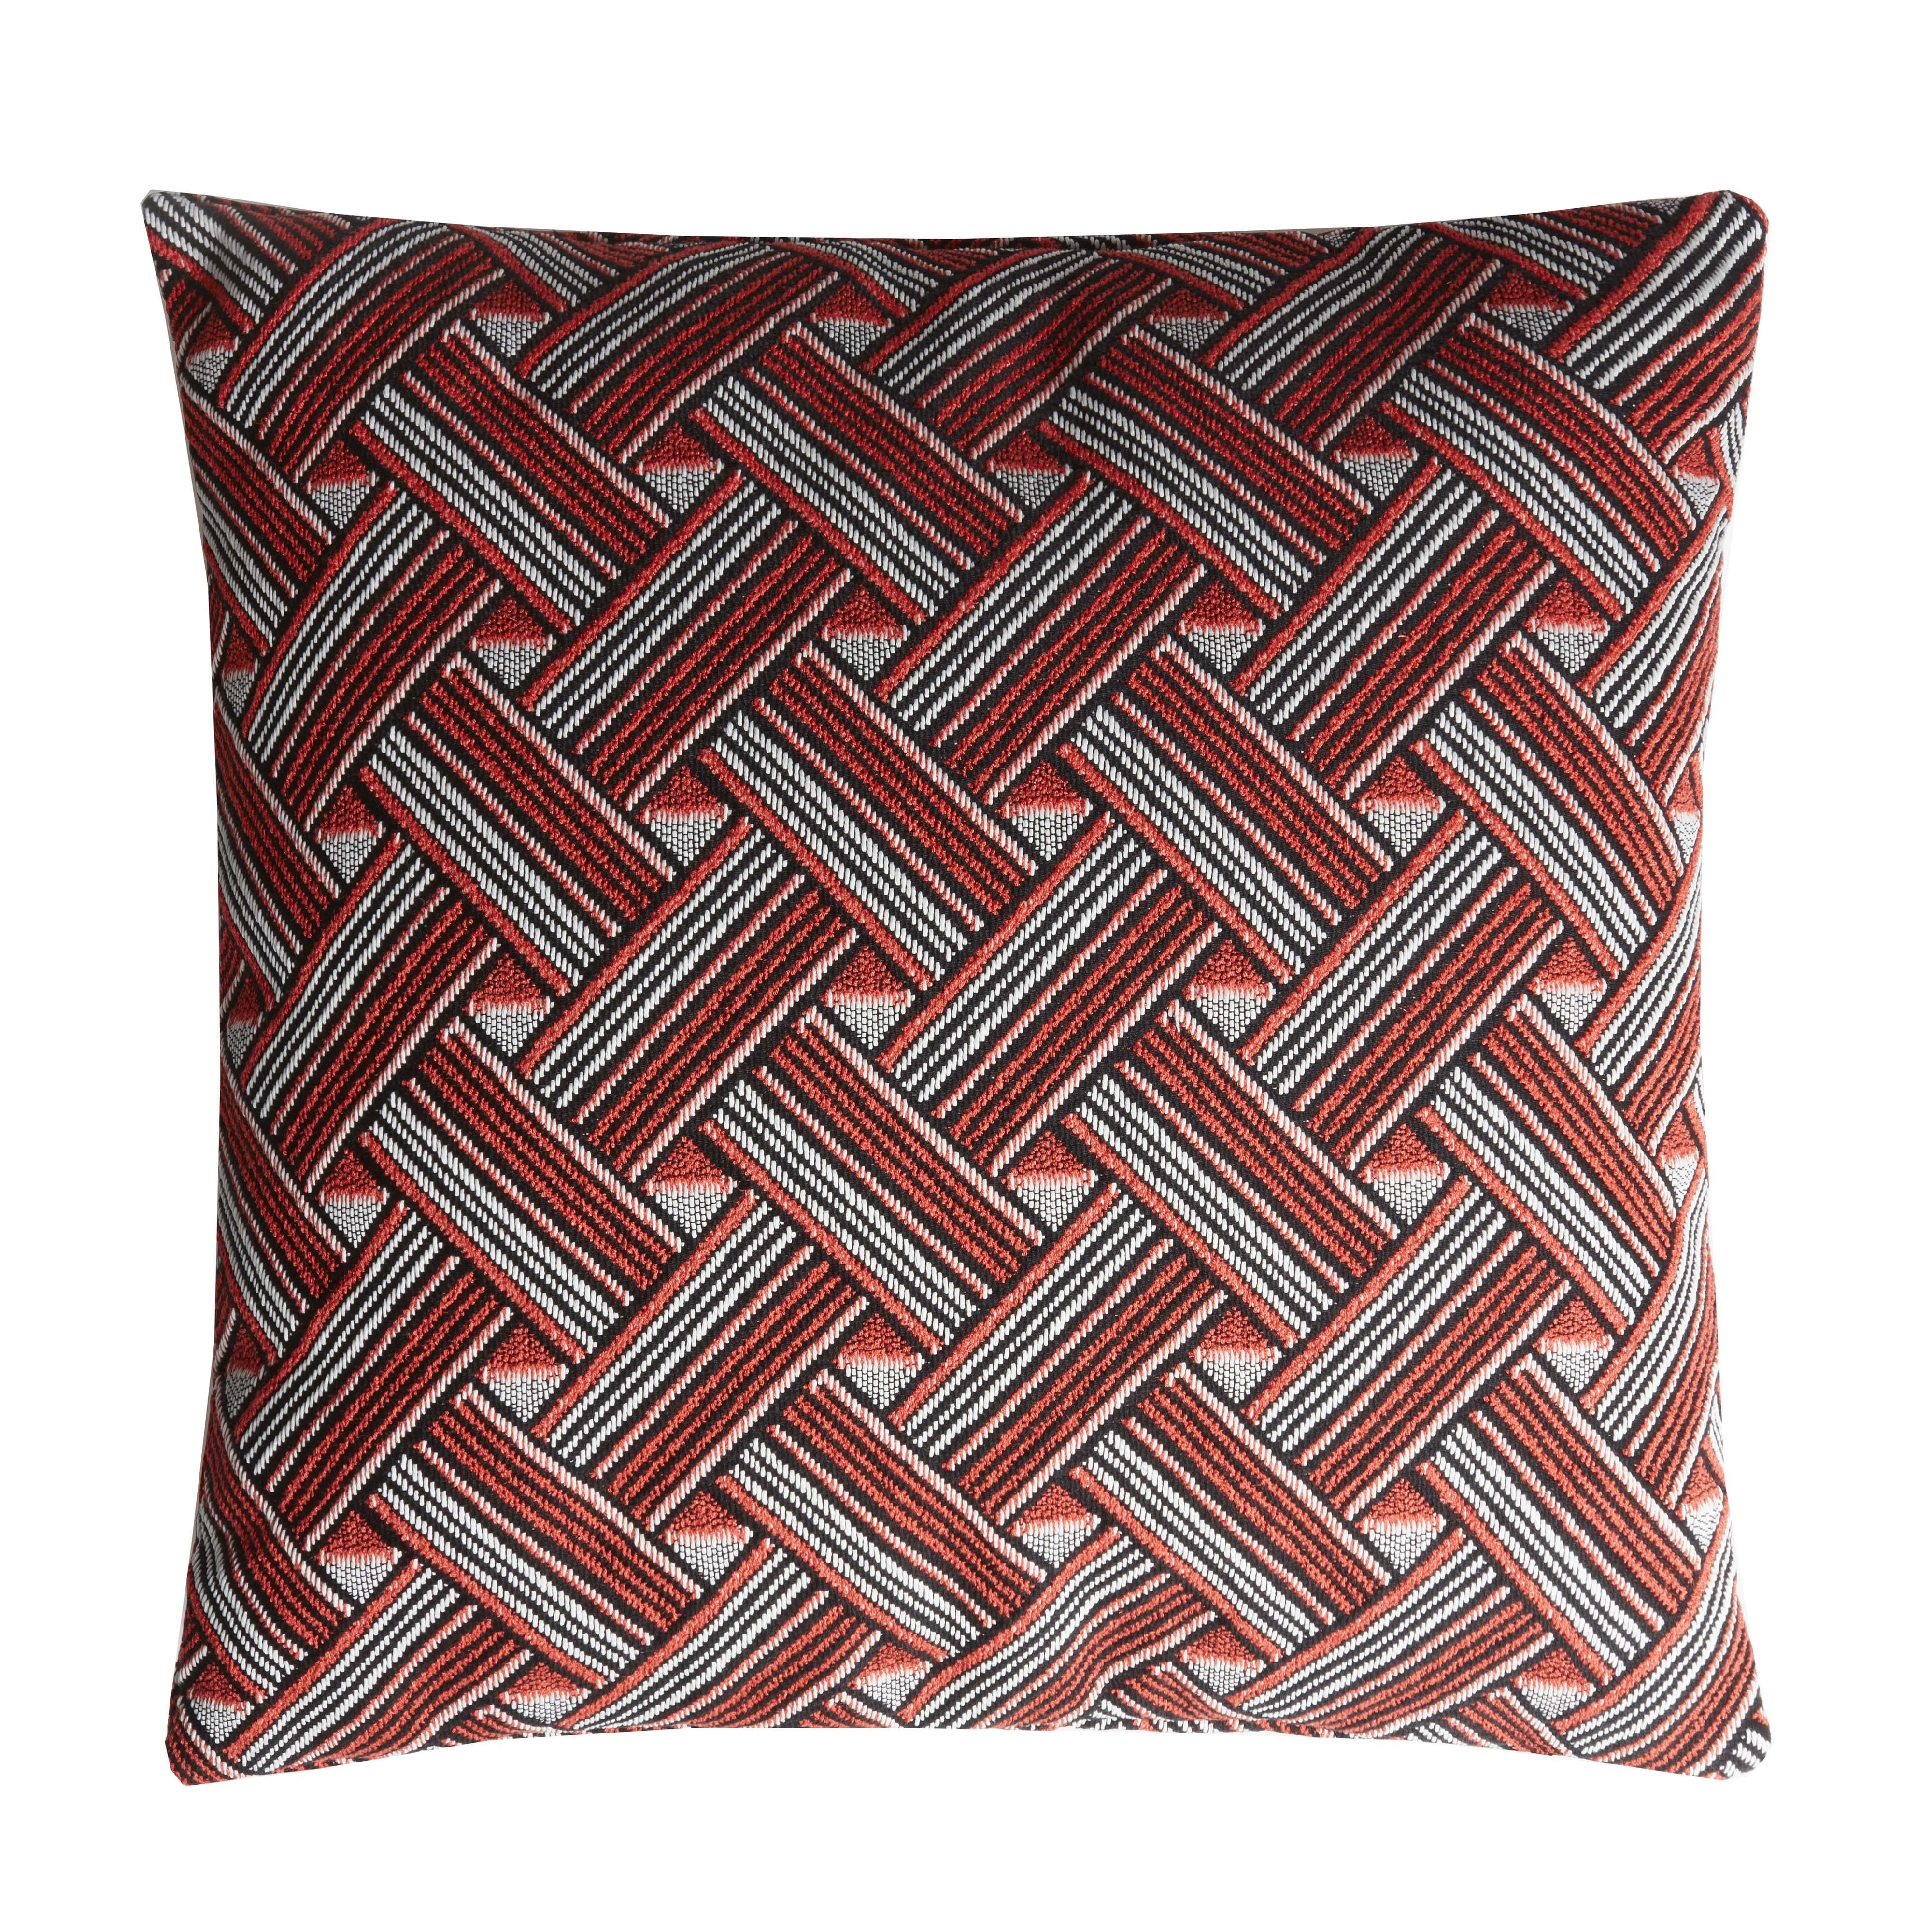 Italian Major Collection Cushion  Velvet with Fringes Brick For Sale